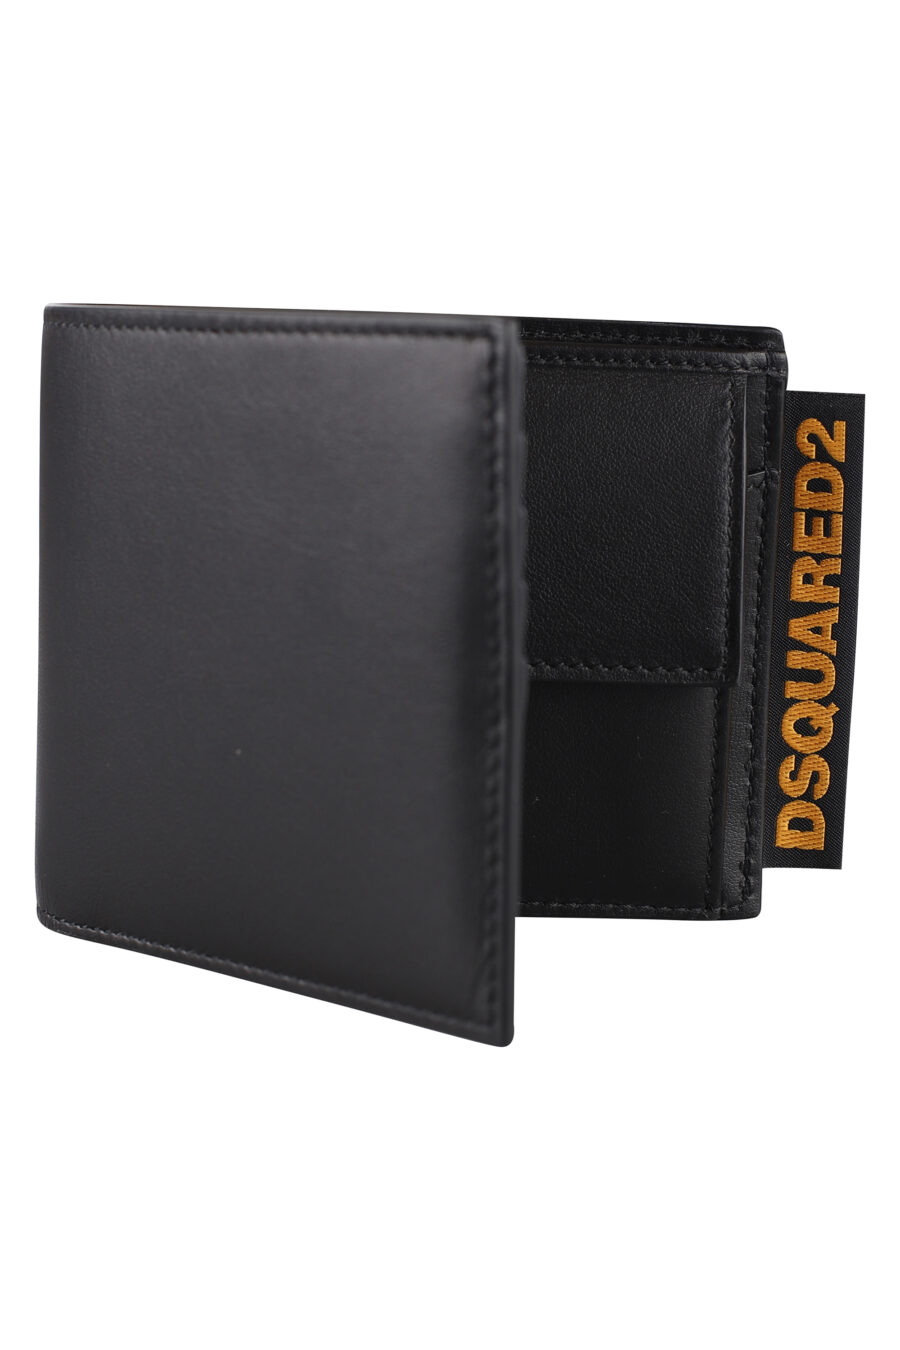 Black wallet with yellow label and logo - IMG 1270